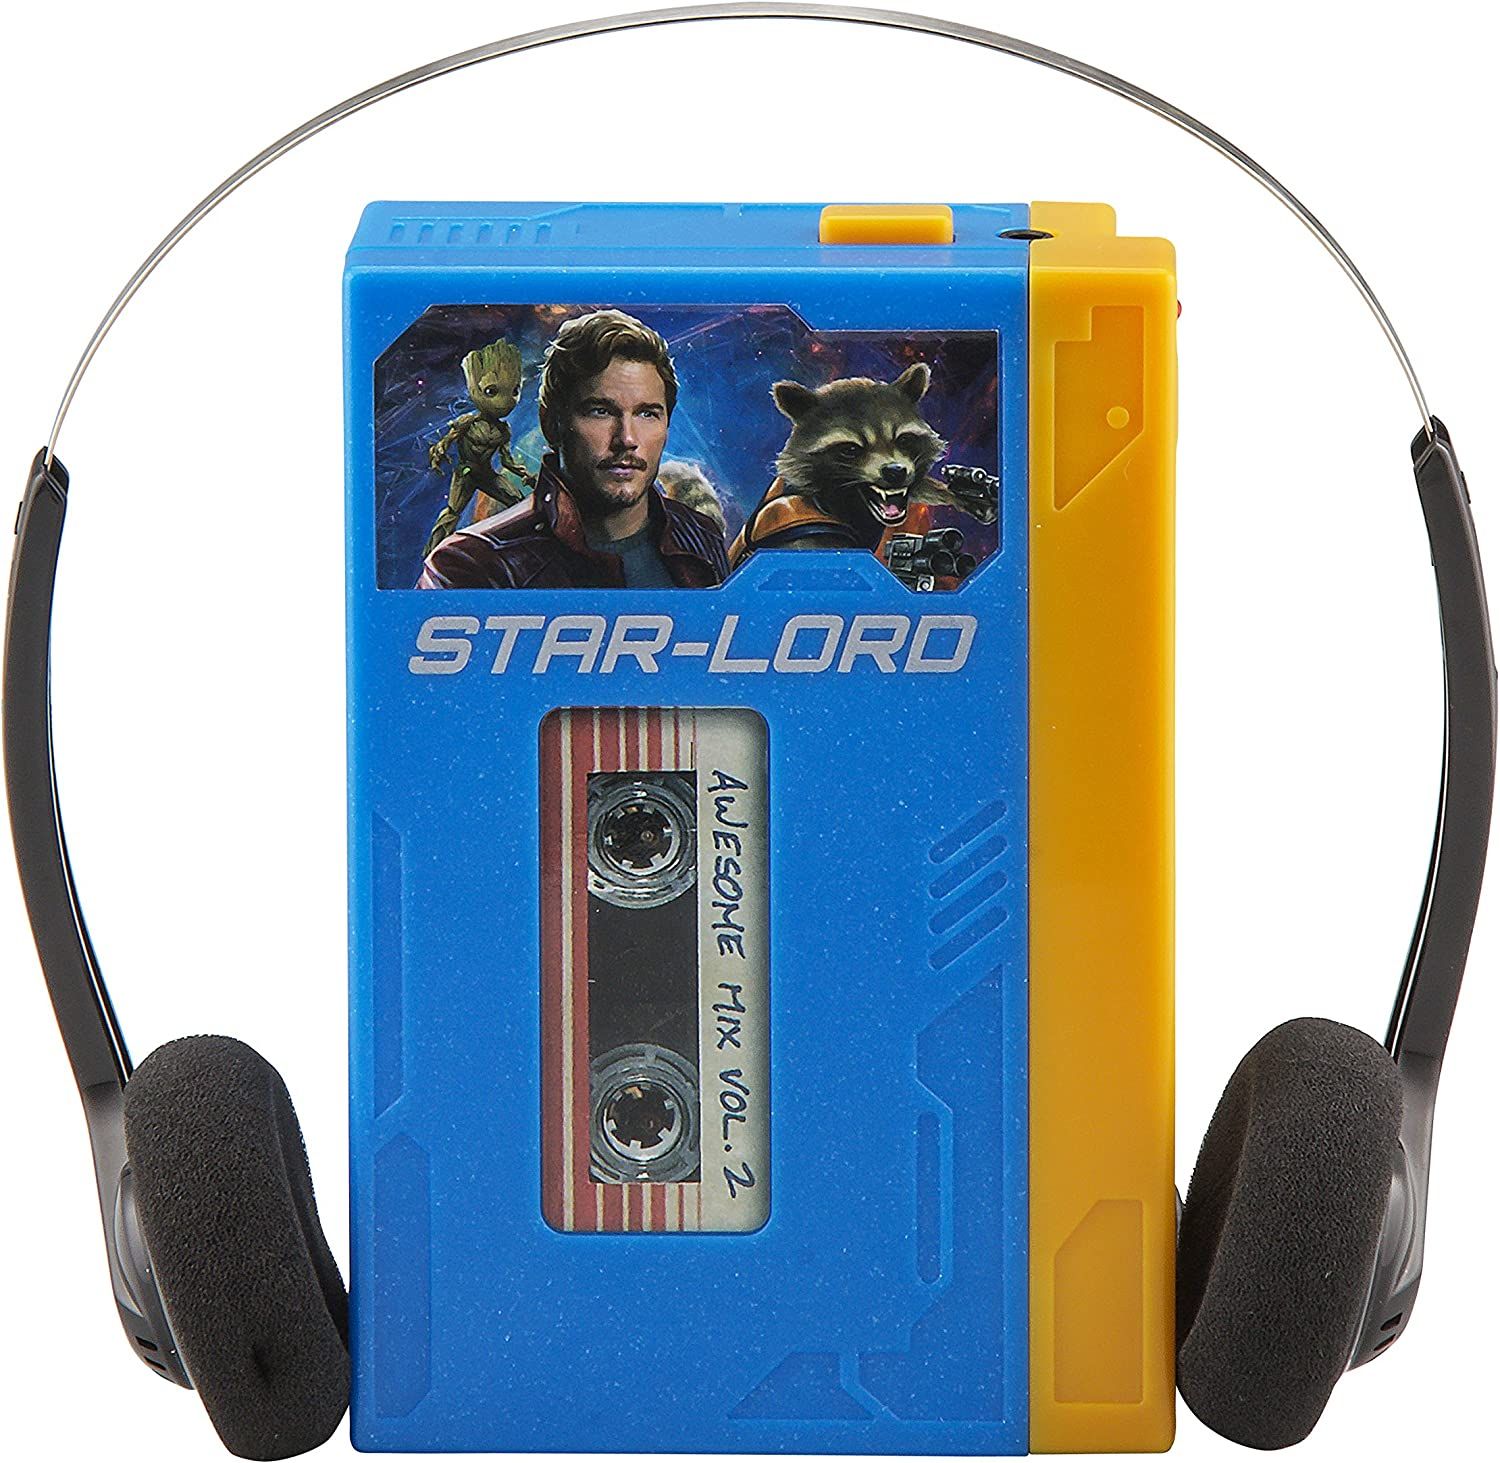 Guardians of the Galaxy Starlord Walkman Voice Recorder and MP3 Player headphones